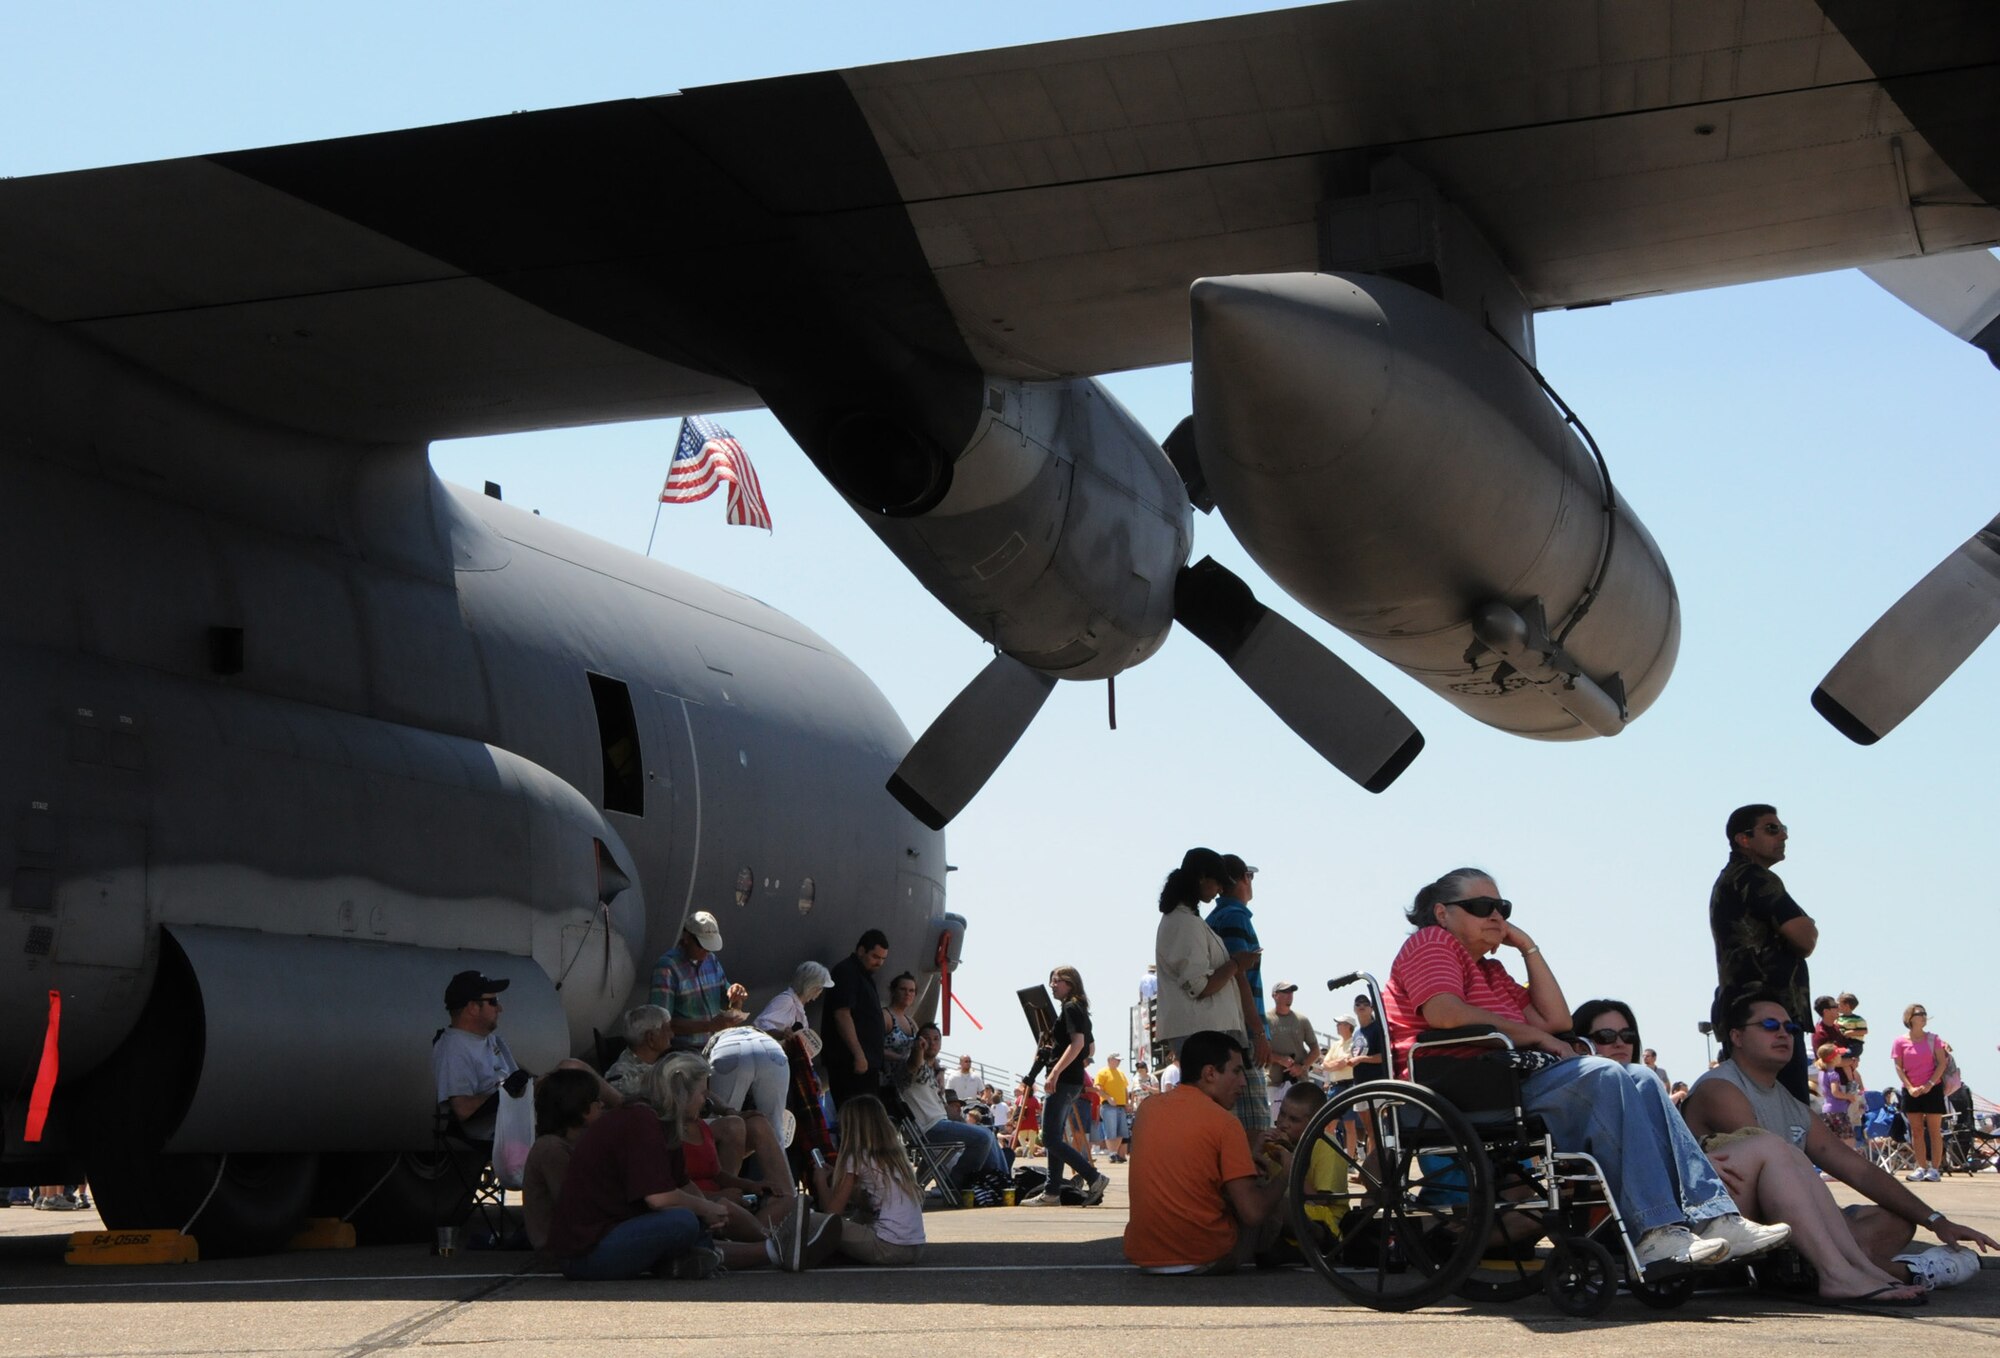 Attendees seek shade underneath a 919th Special Operations Wing C-130 at the 75th Anniversary Air Show April 11. More than 125,000 were in attendance during the air show April 10-11, enjoying a variety of aerial performances and static displays. This was Eglin’s first open house since 2007 and was timed to coincide with the 75th anniversary of the installation. The F-22A Raptor demo, Army Black Daggers and "Tora, Tora, Tora" were some of the highlights of the event. (U.S. Air Force photo/ Samuel King Jr.)